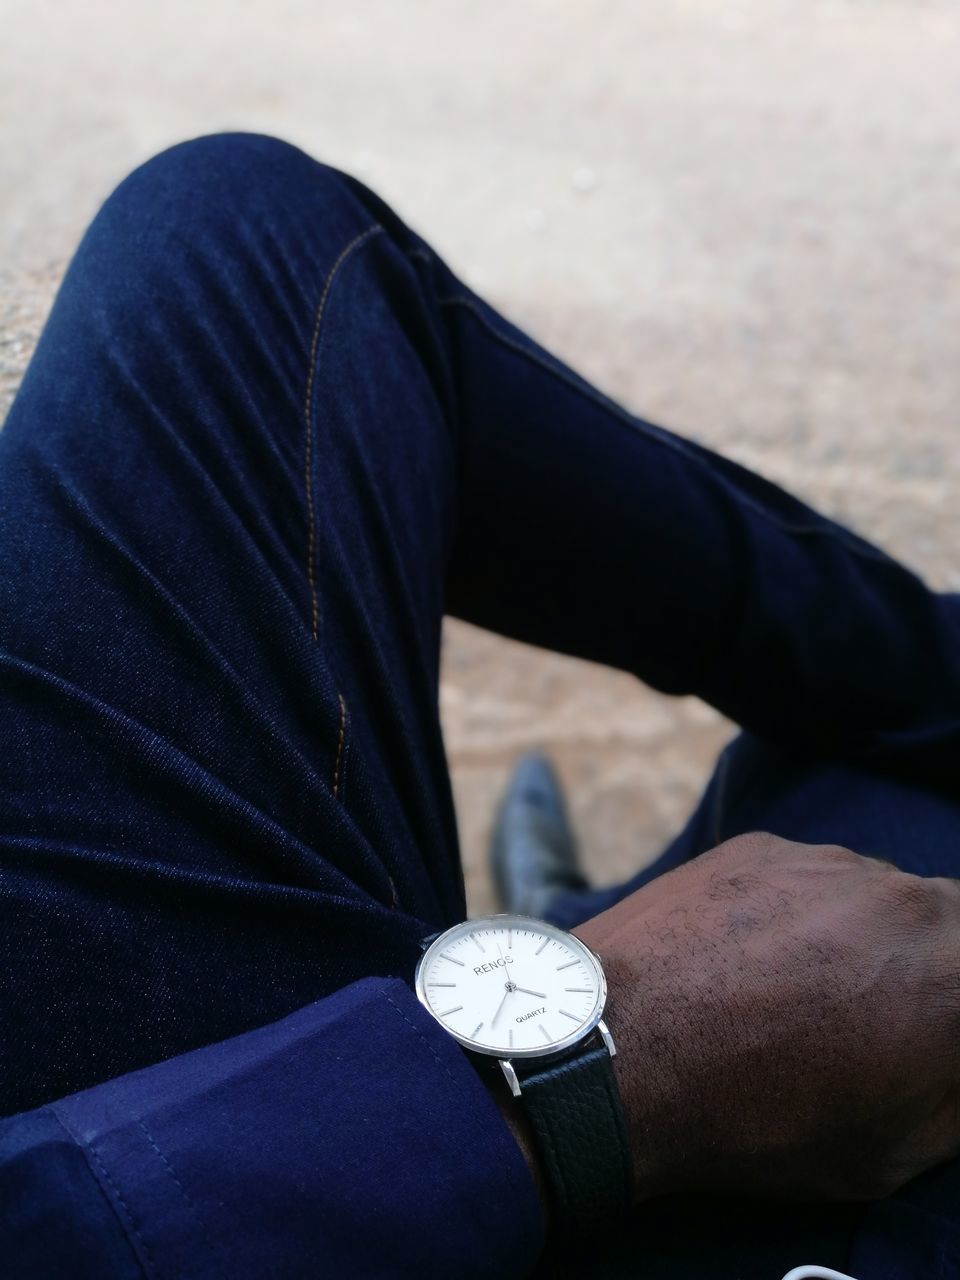 real people, one person, lifestyles, wristwatch, hand, watch, human hand, human body part, time, leisure activity, men, personal perspective, body part, focus on foreground, day, adult, low section, casual clothing, human leg, outdoors, clock, jeans, checking the time